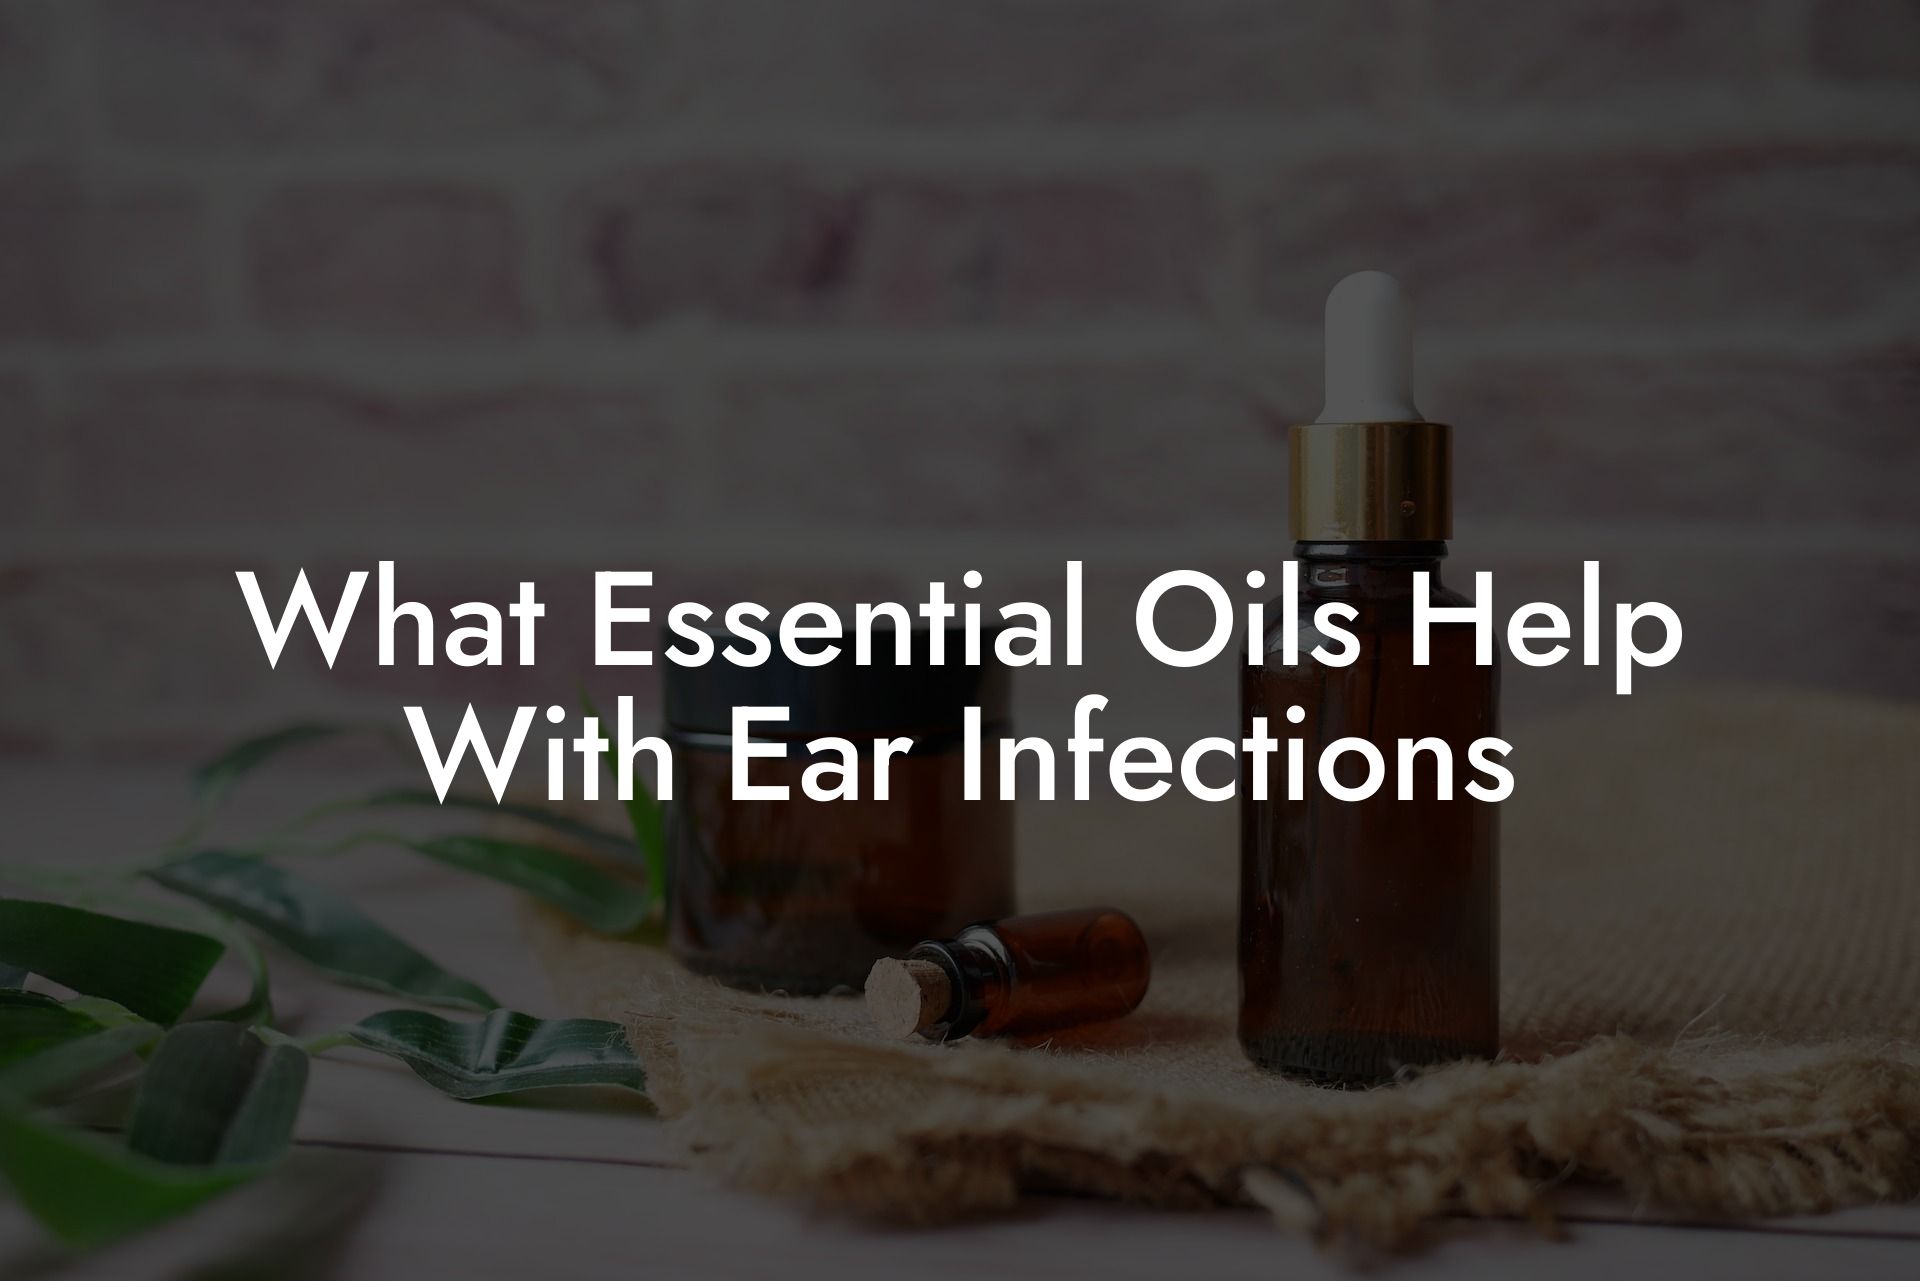 What Essential Oils Help With Ear Infections